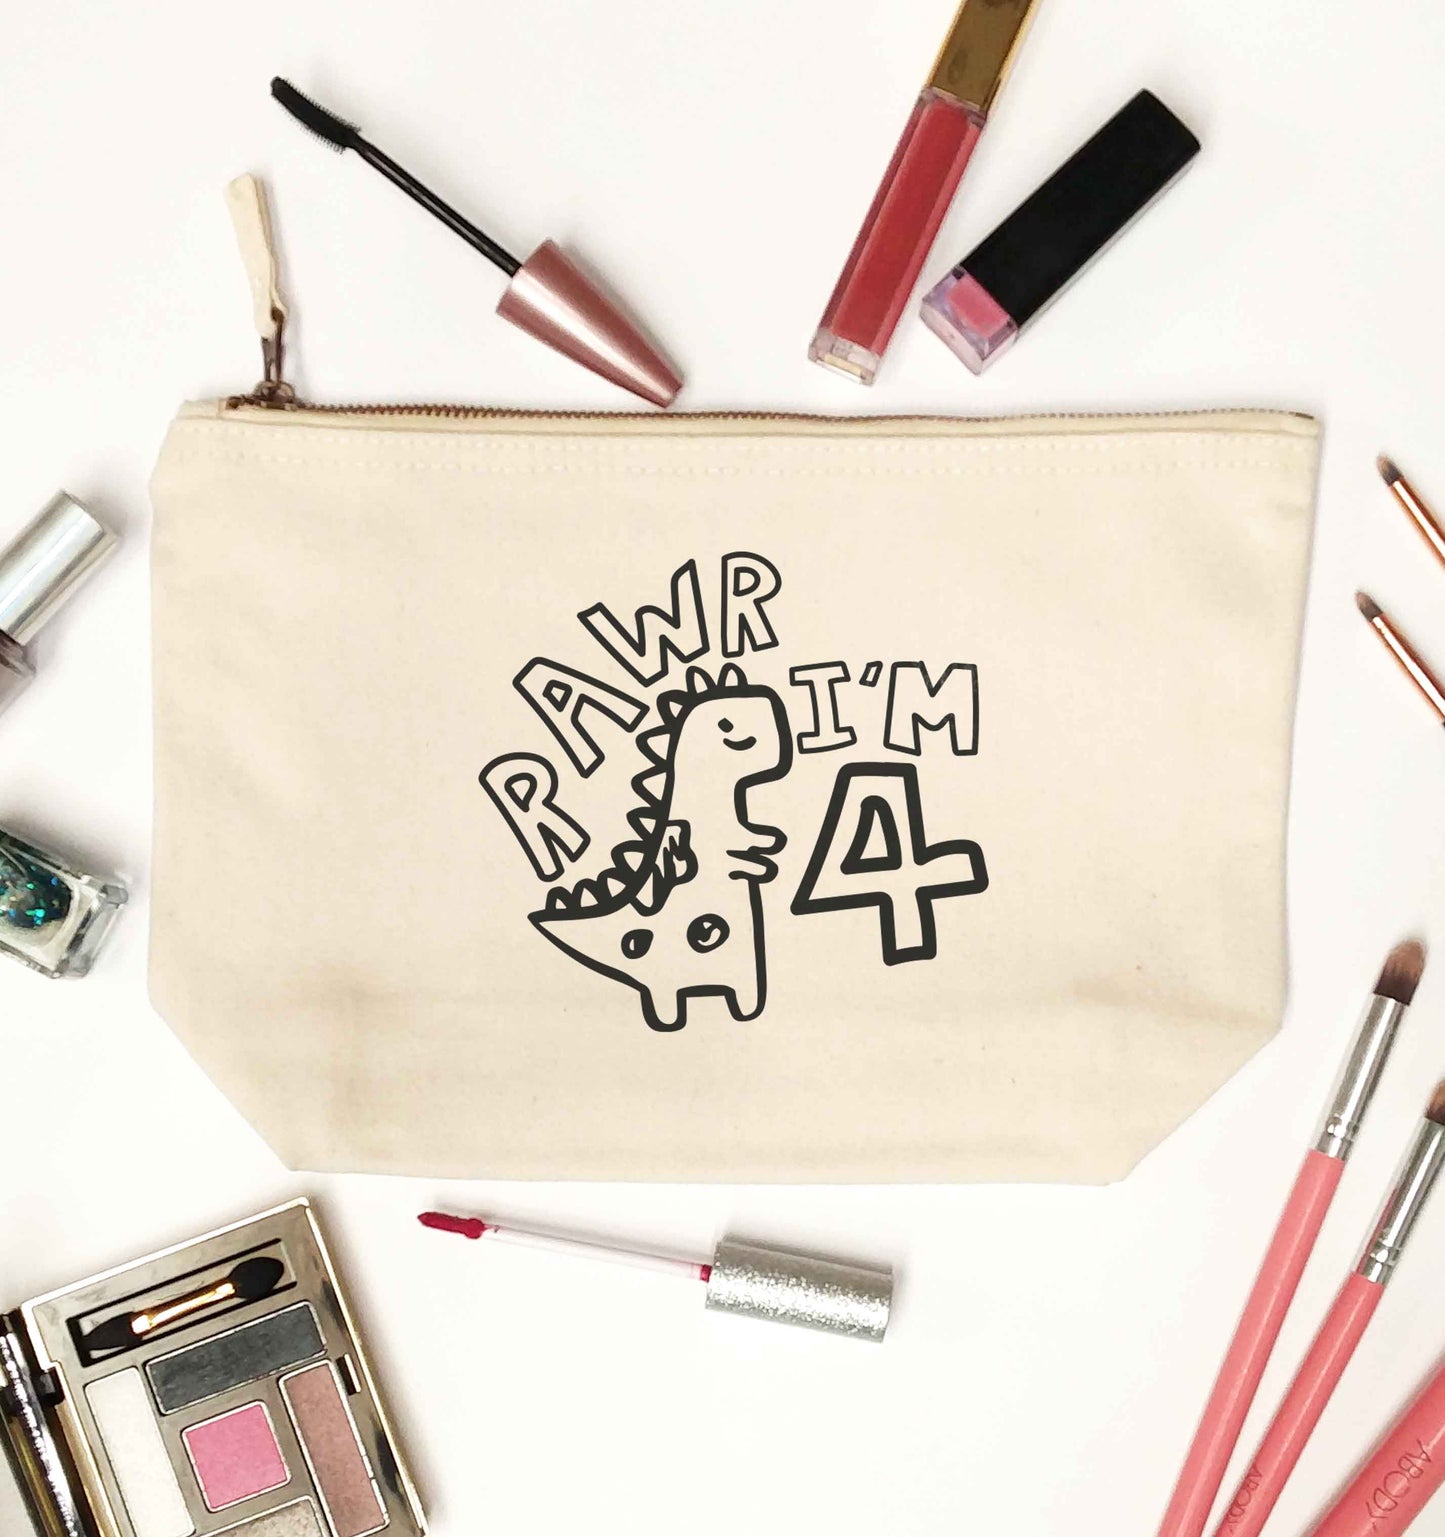 Rawr I'm four - personalise with ANY age! natural makeup bag